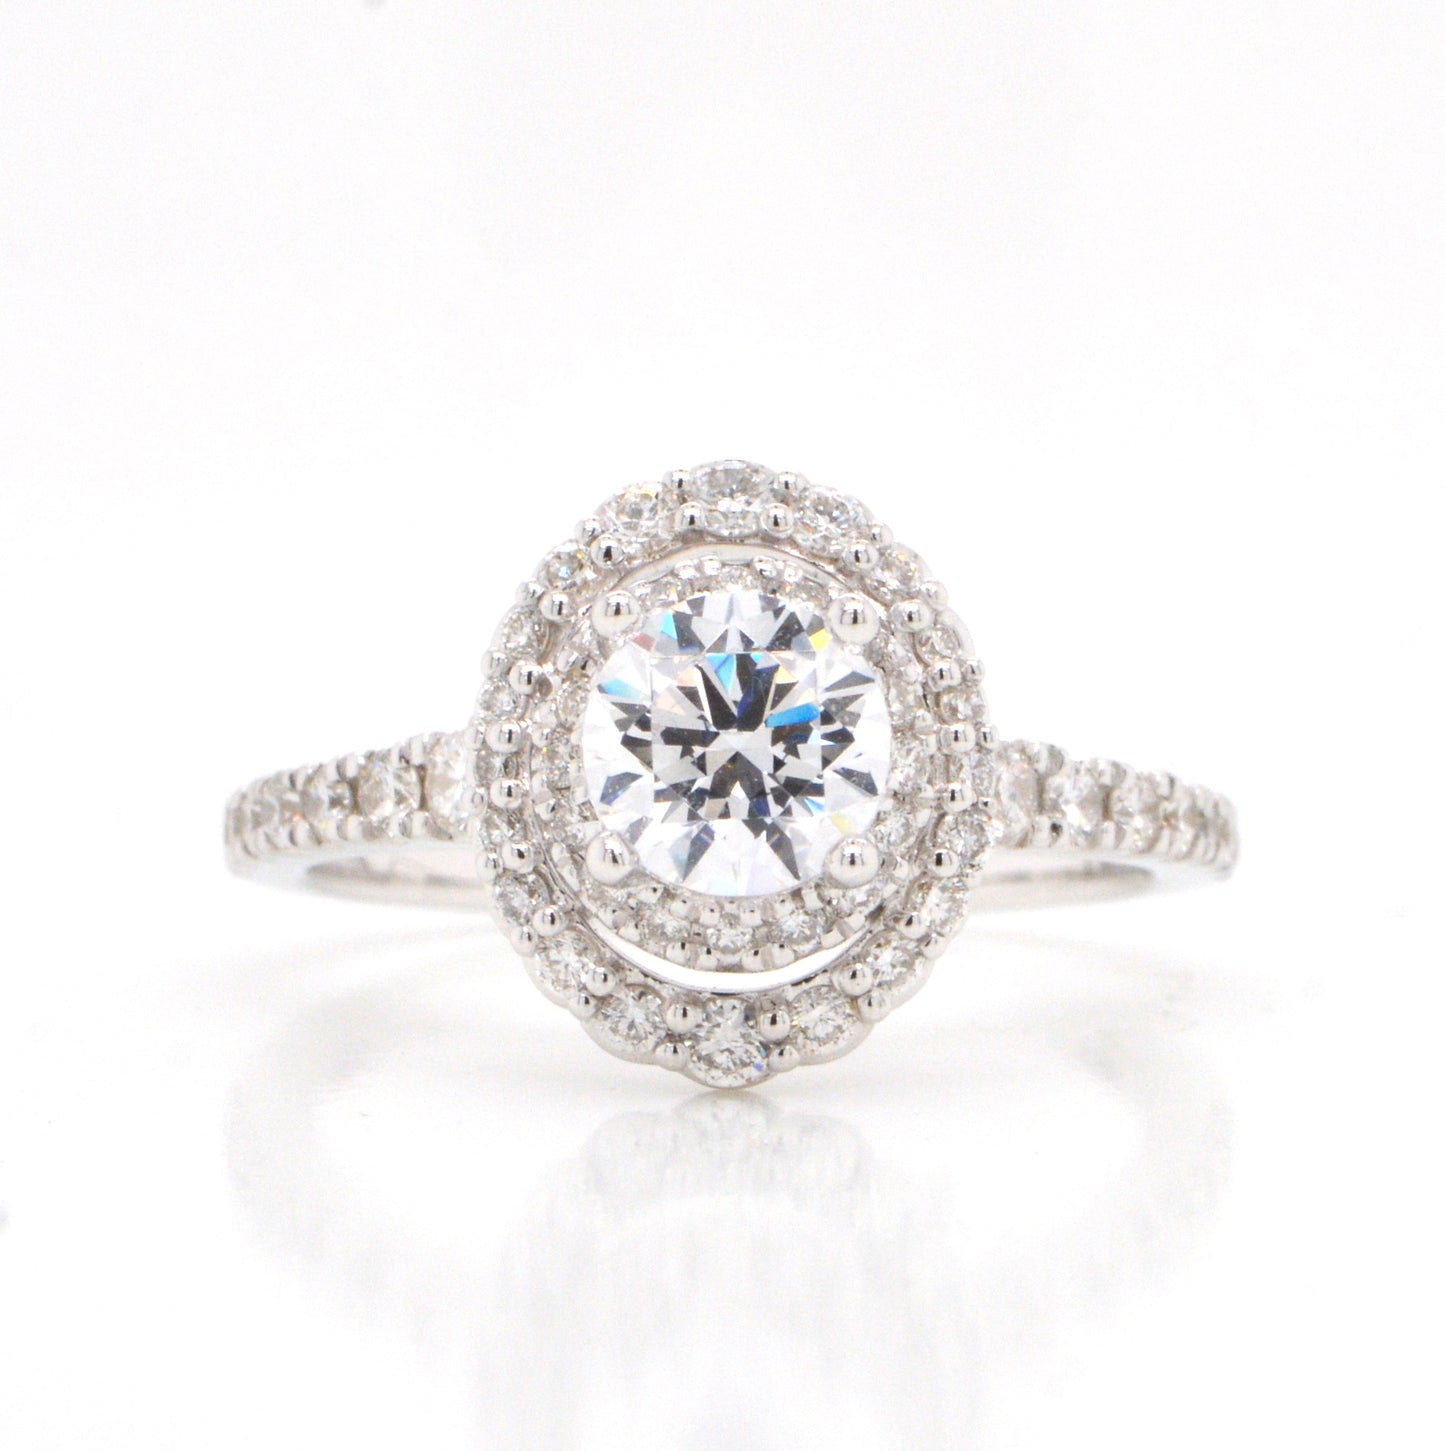 14K White Gold Diamond Engagement Ring with A Double Halo